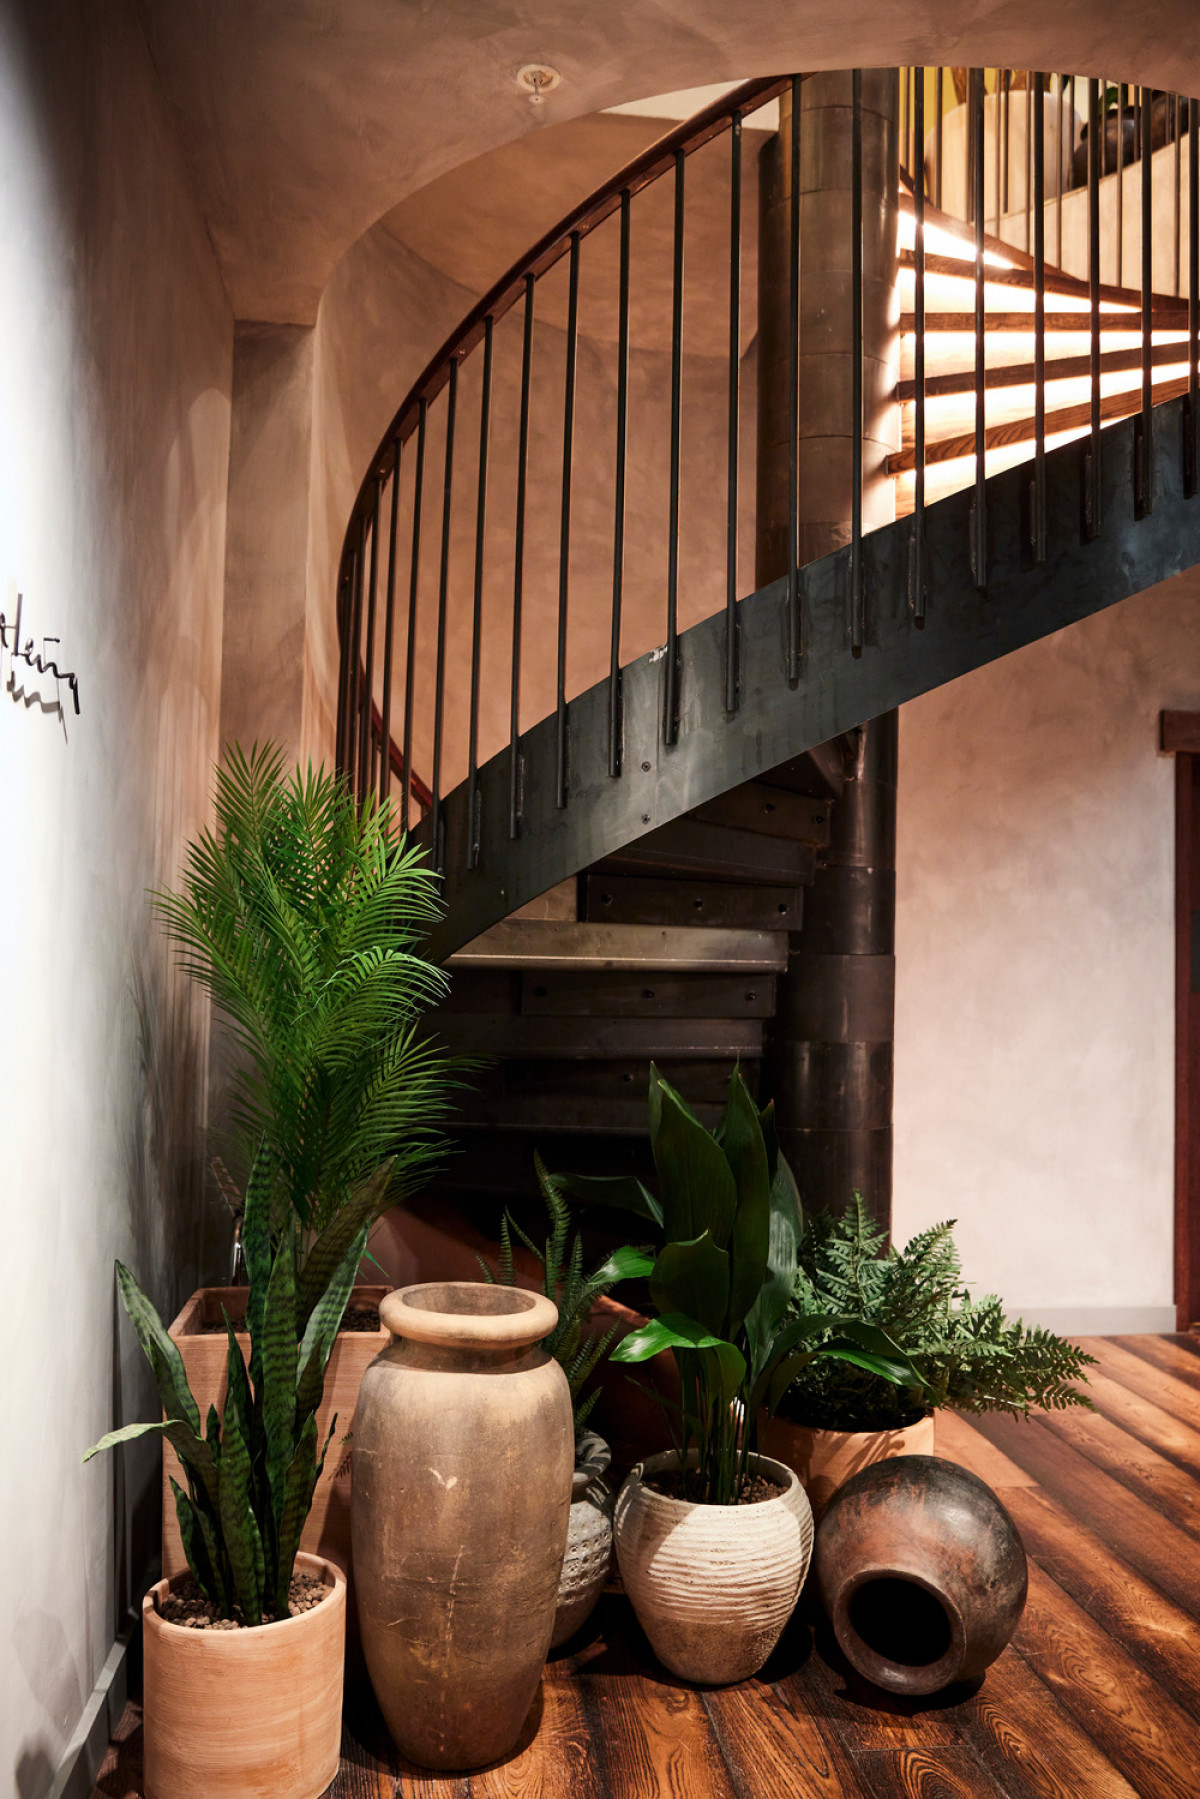 Blackened steel staircase and Mexican artefacts assemble | Photo credit: Charlie Mckay